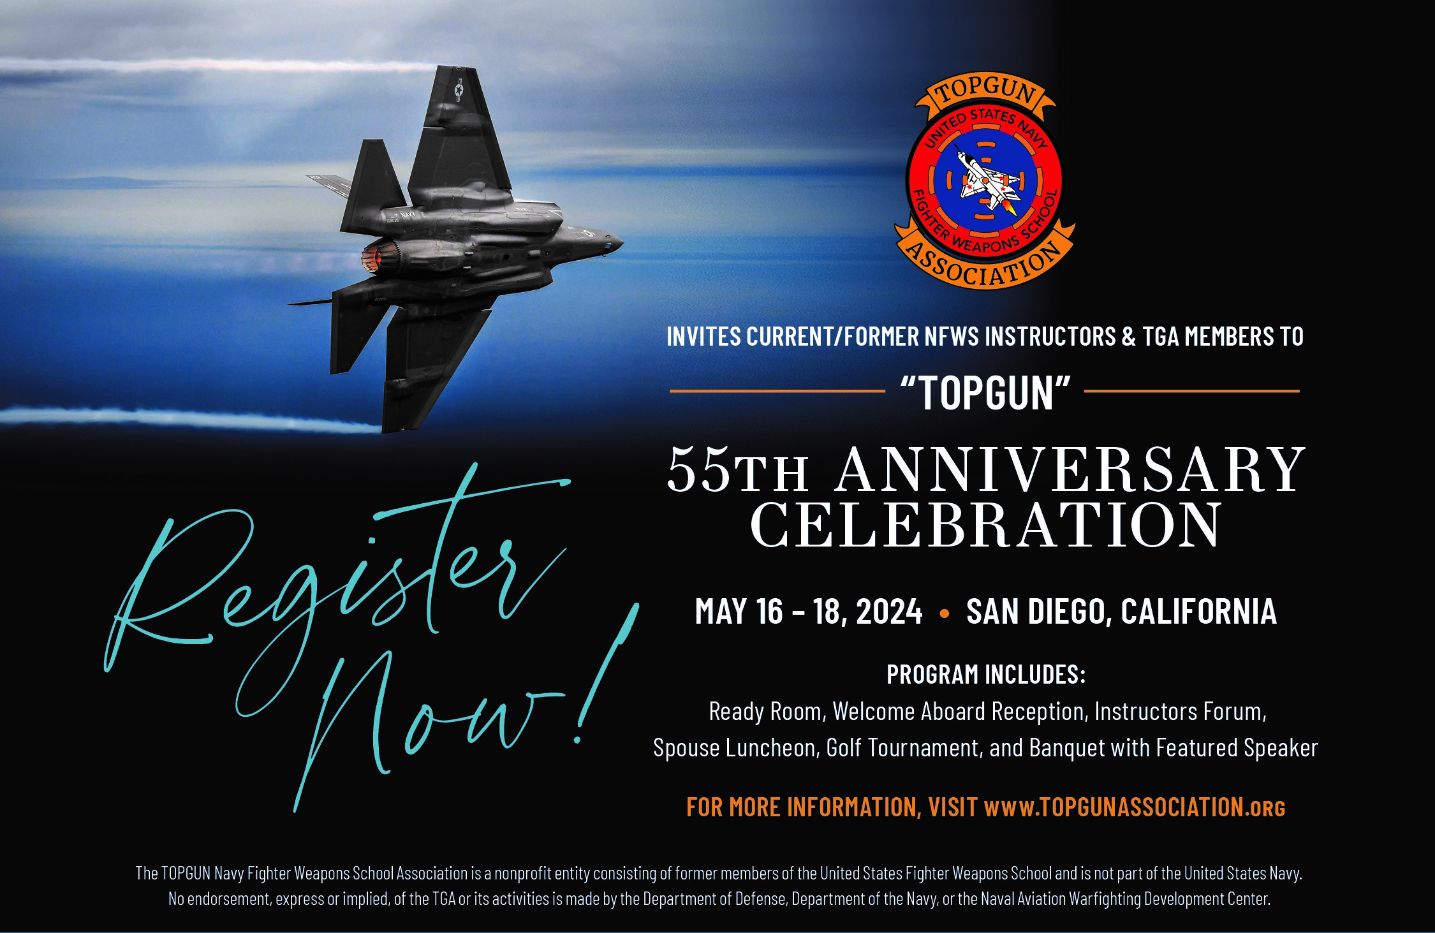 TOPGUN Association invites current/former NFWS instructors and TGA members to "TOPGUN" 55th Anniversary Celebration. May 16-18, 2024 in San Diego, California. Program includes Ready Room, Welcome Aboard Reception, Instructors Forum, Spouse Luncheon, Golf Tournament and Banquet with Featured Speaker.